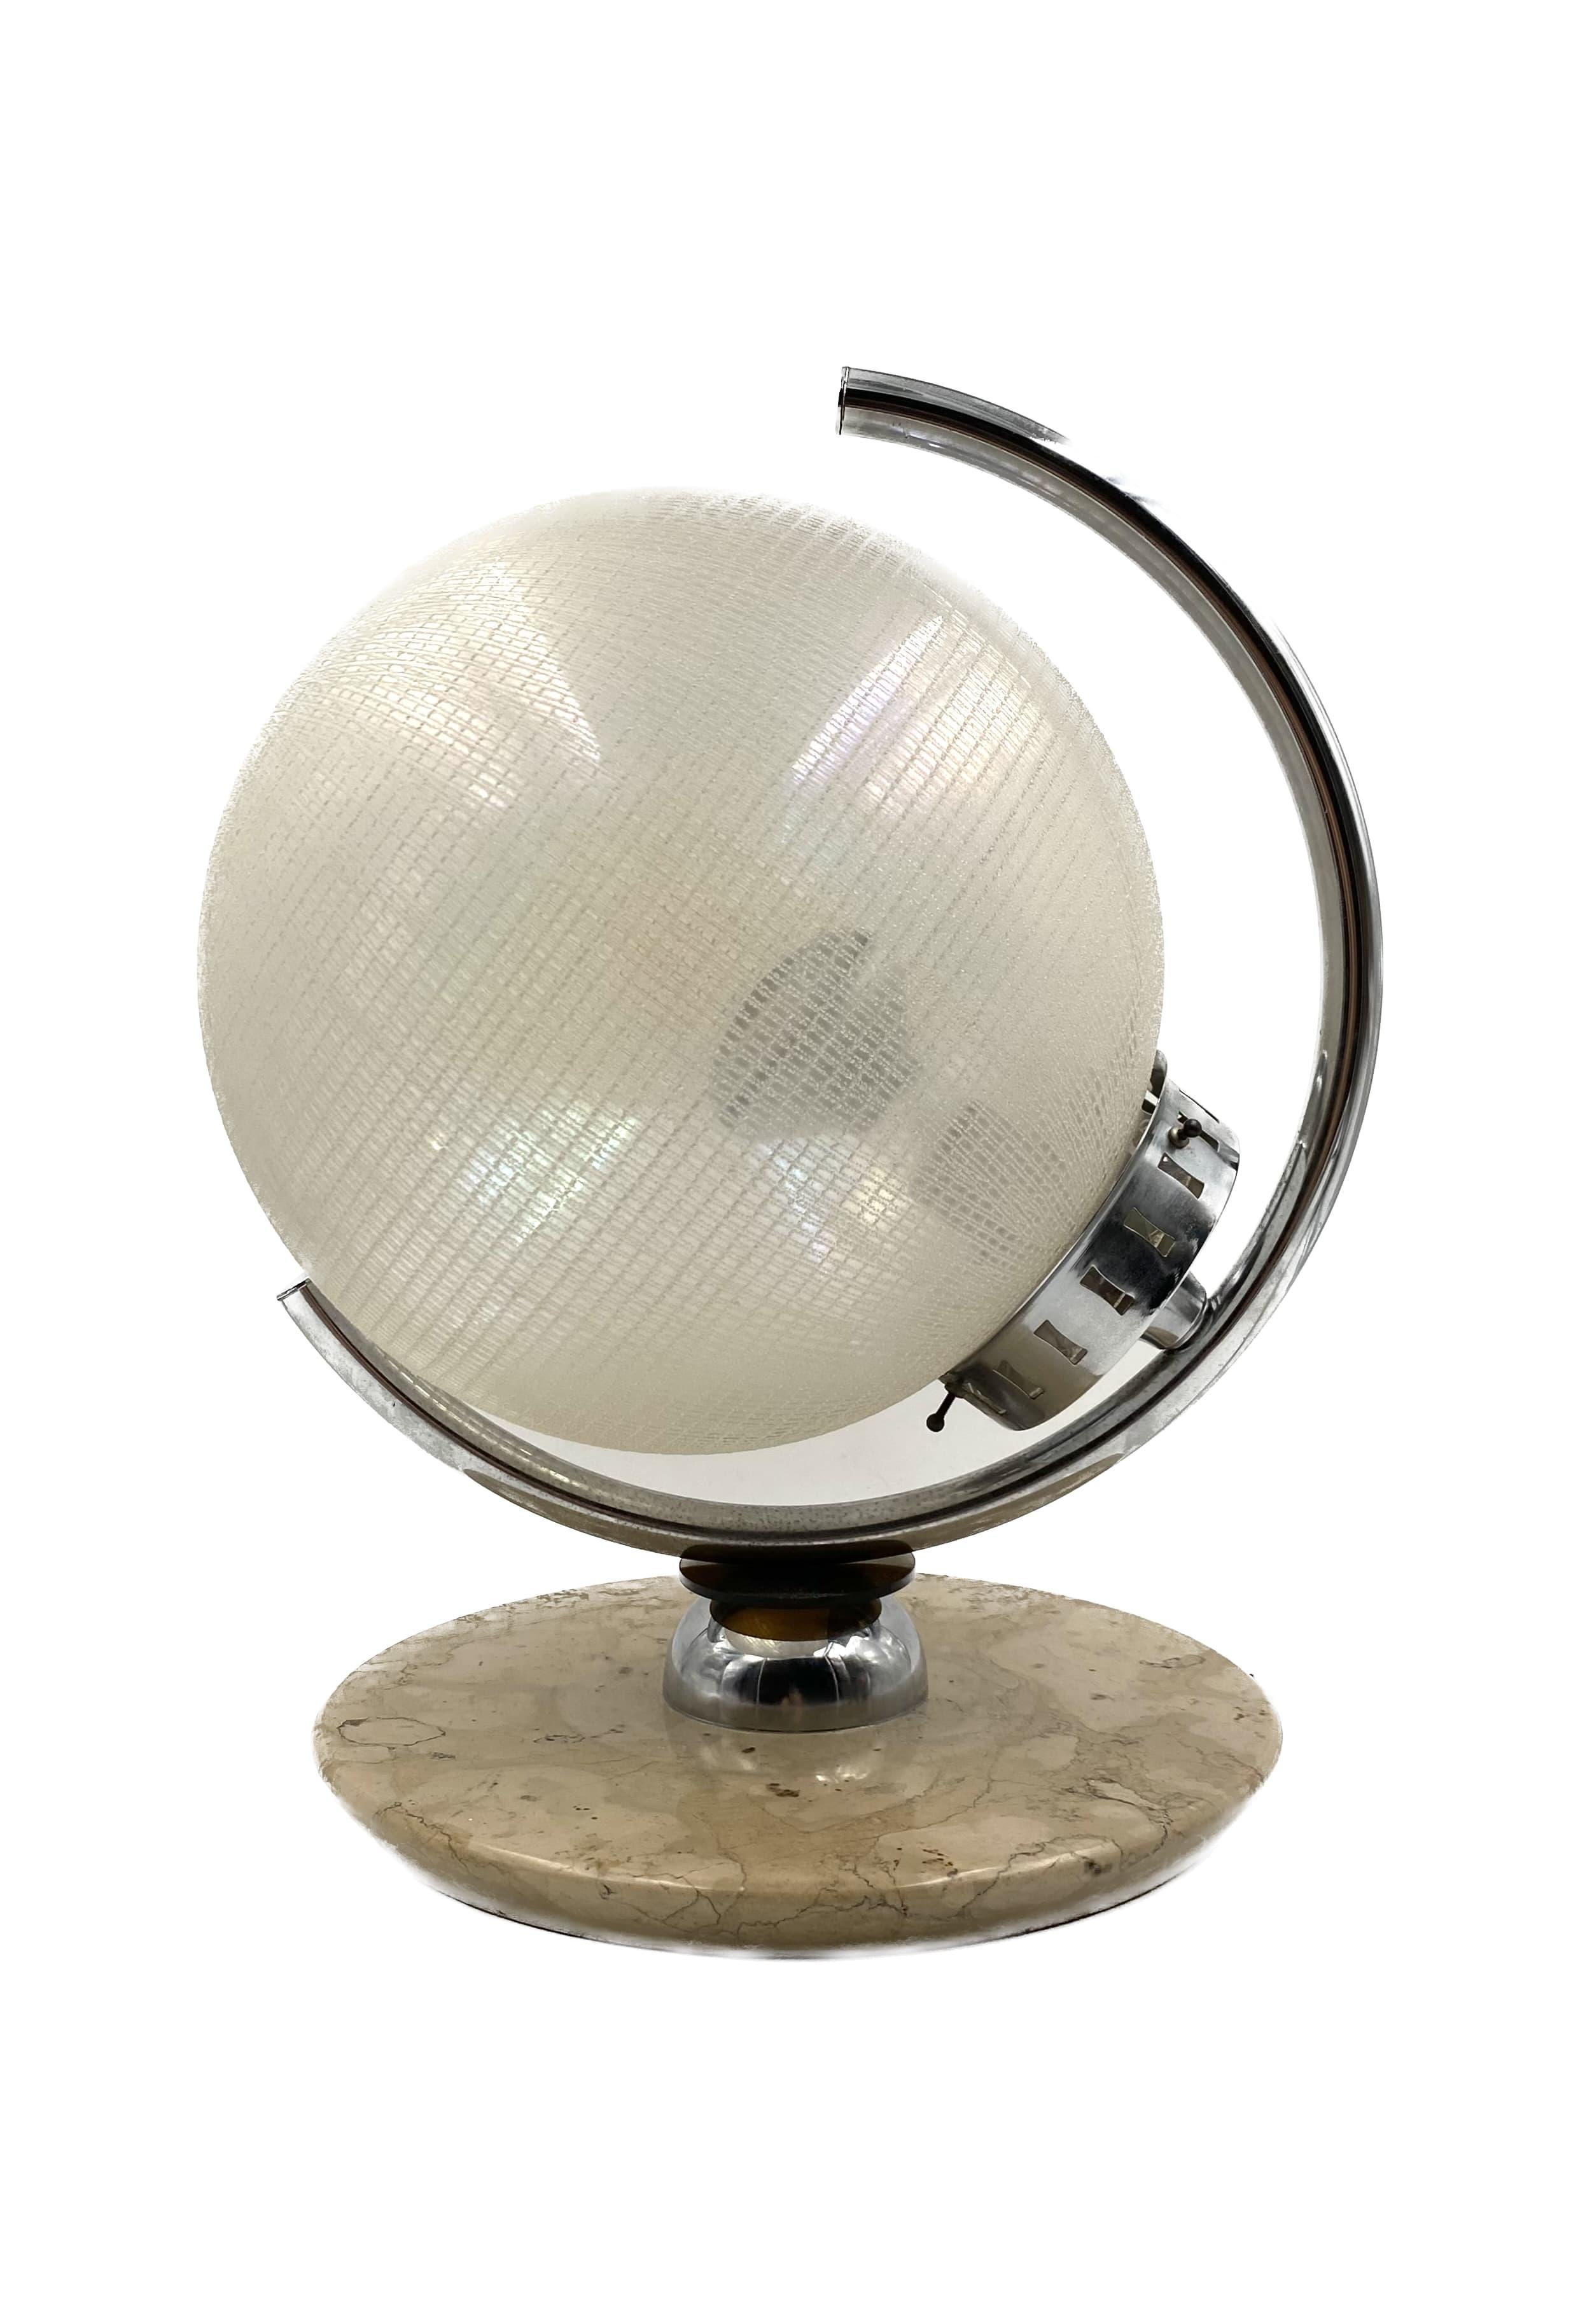 Murano glass spherical table lamp, Mazzega Italy 1970s For Sale 2